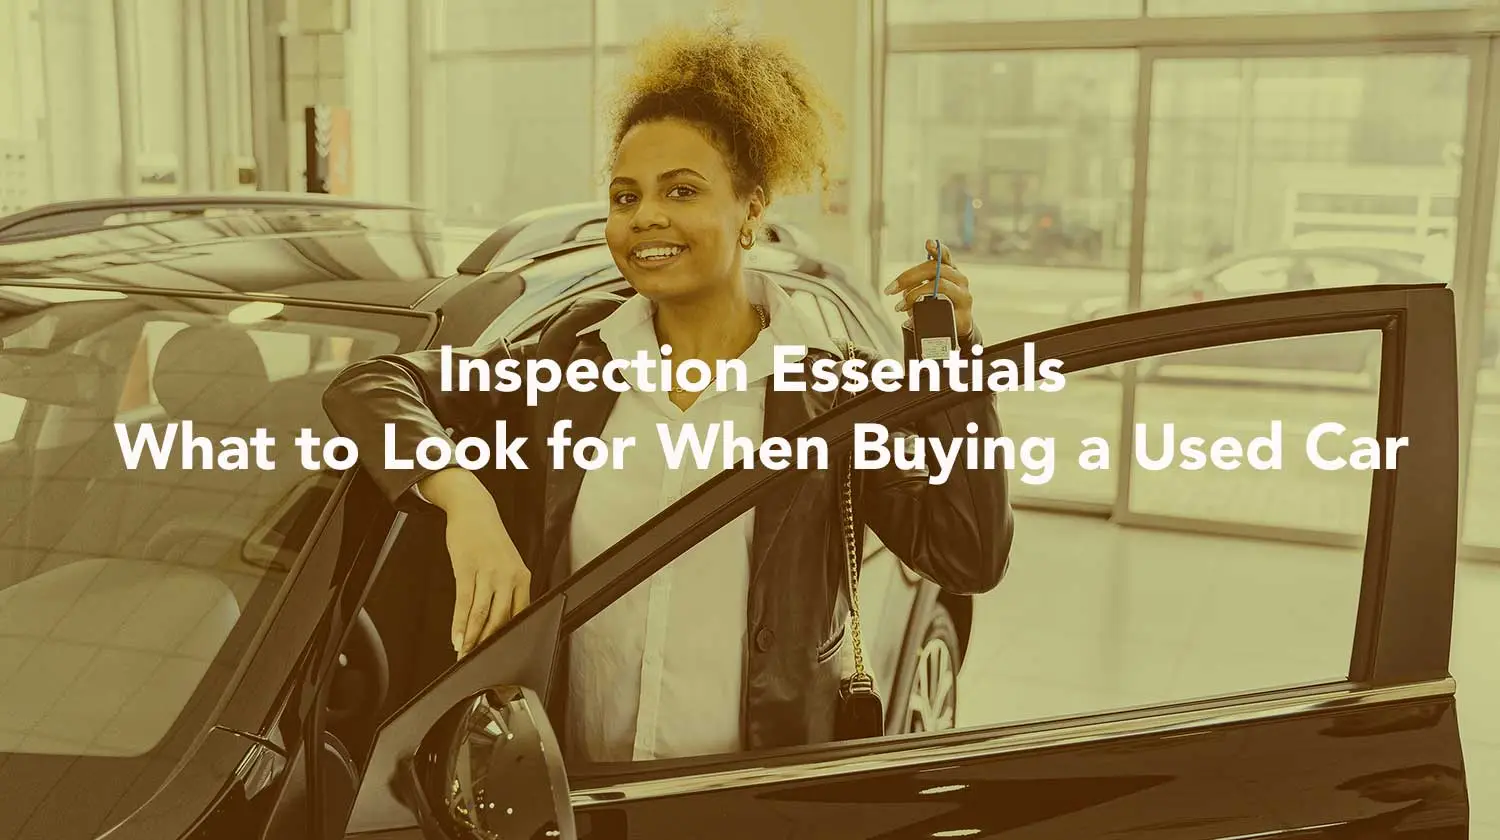 Inspection Essentials: What to Look for When Buying a Used Car